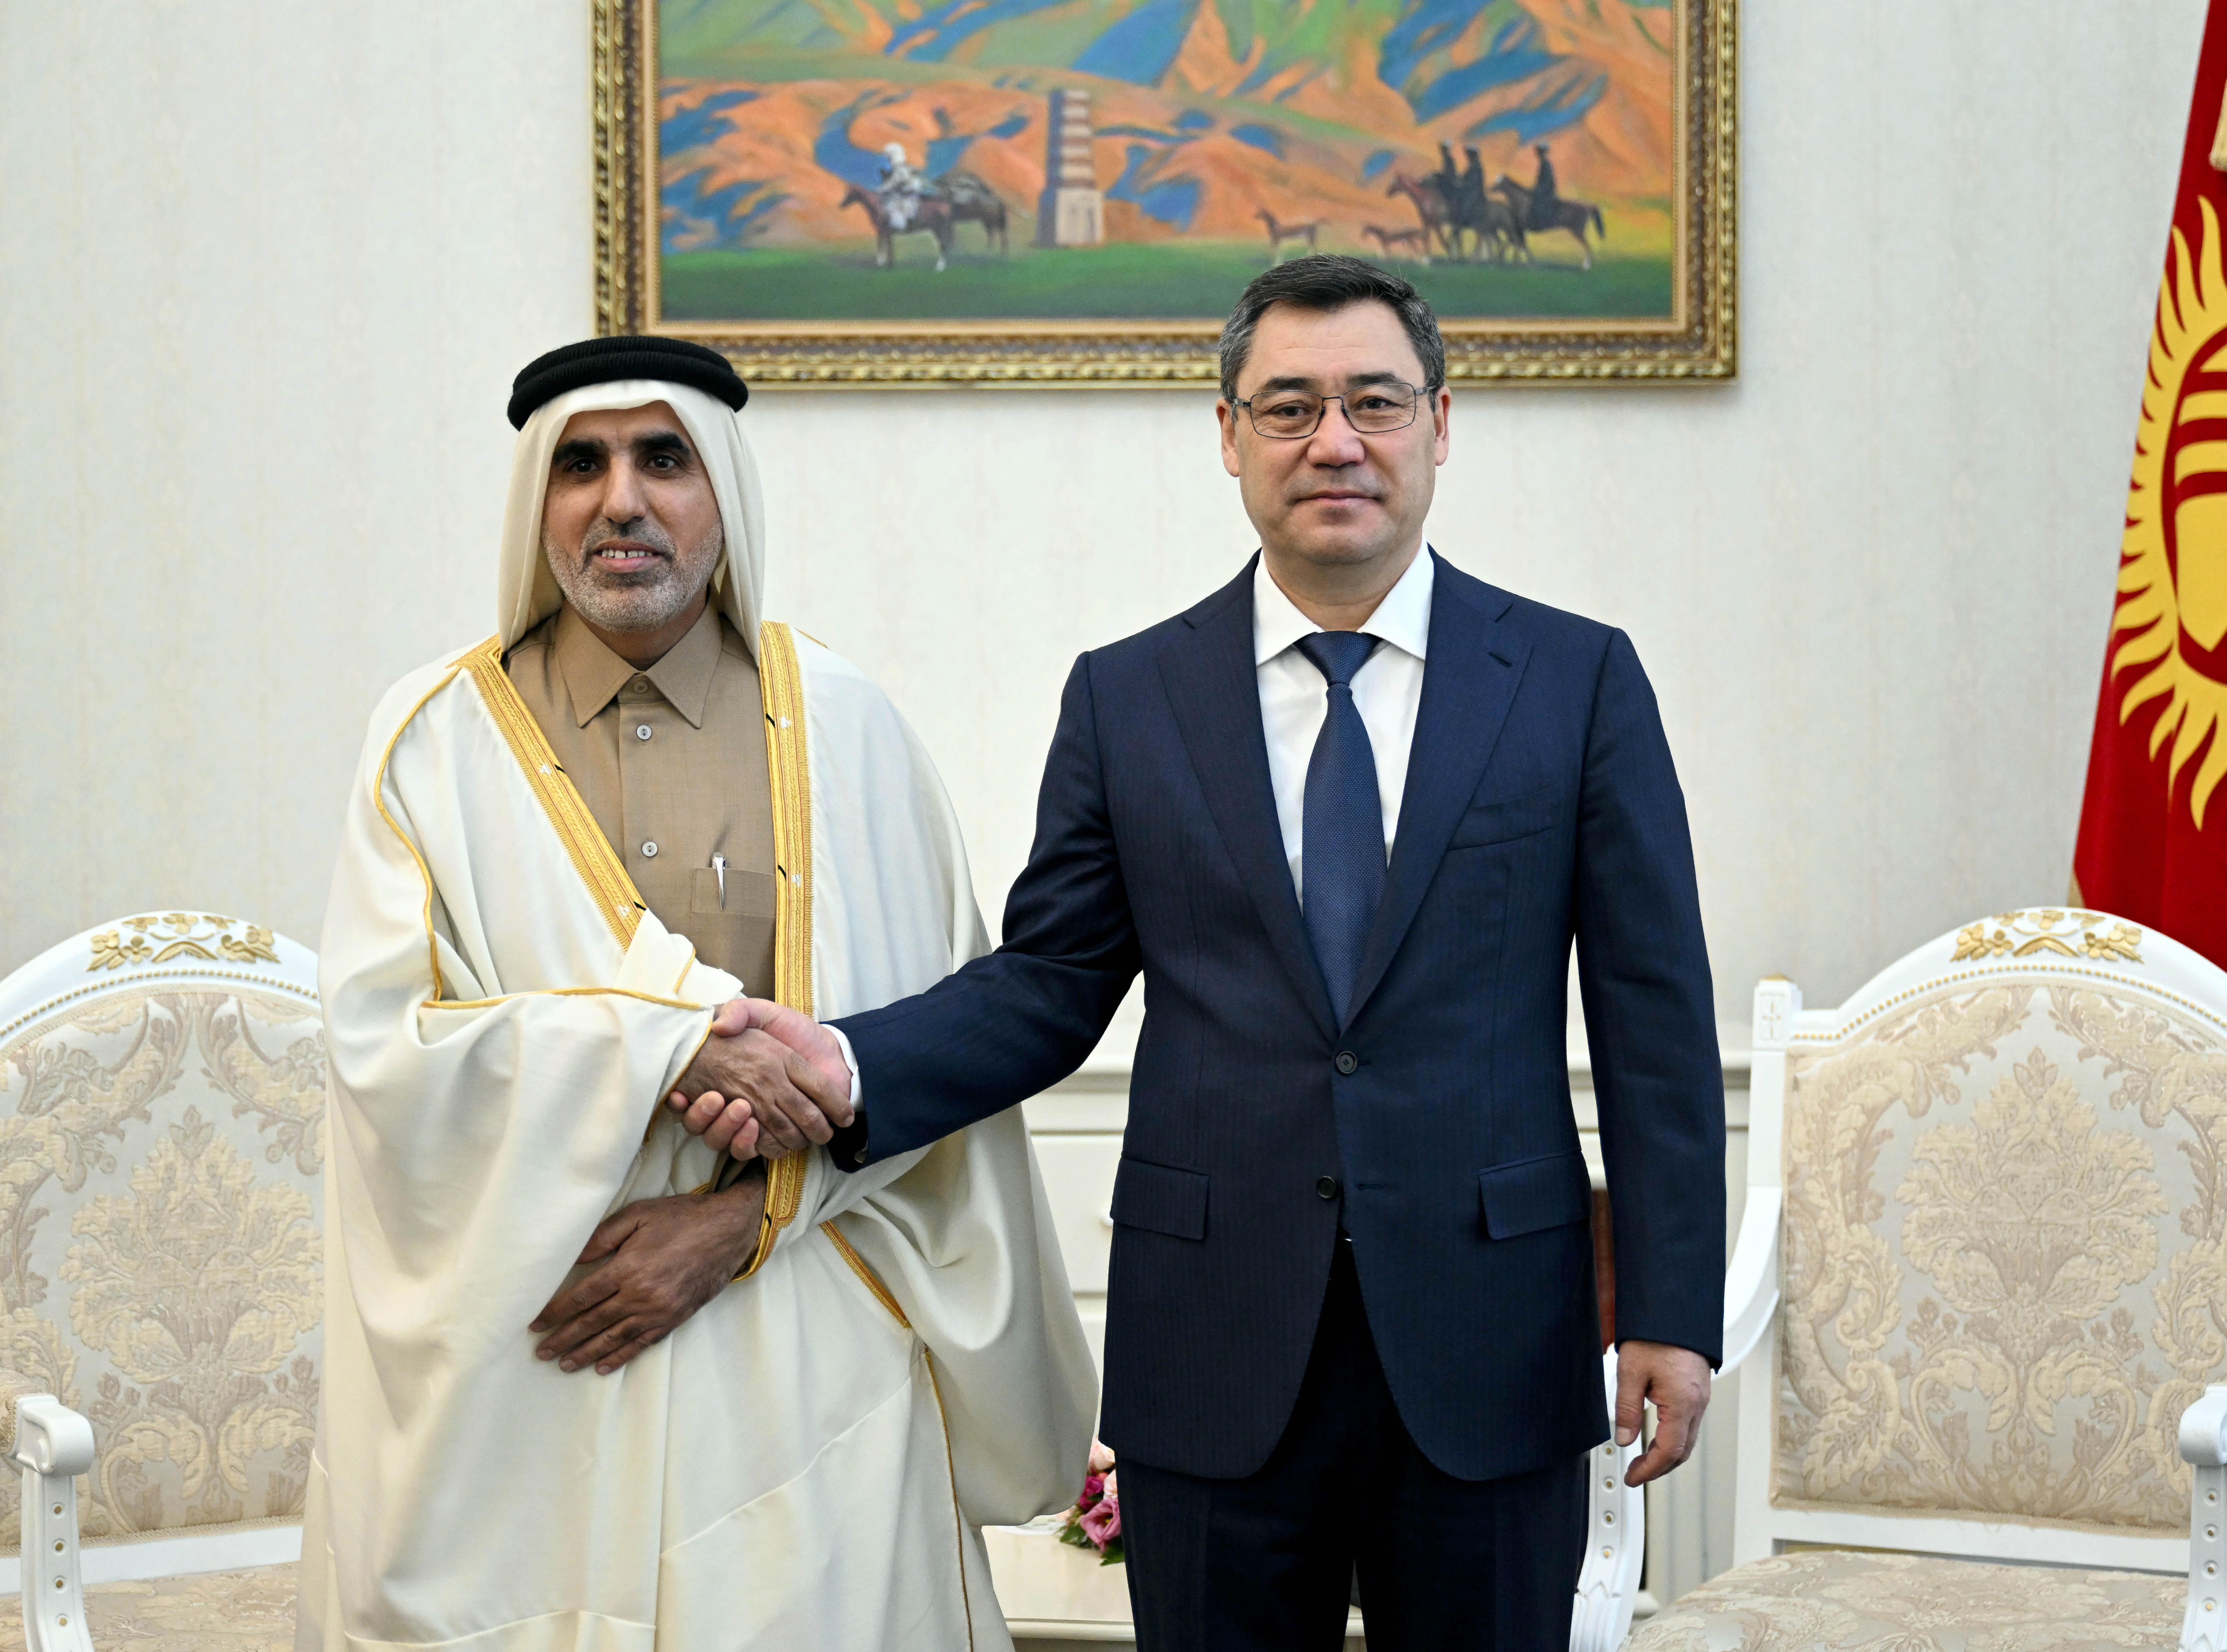 President Sadyr Japarov of the Kyrgyz Republic welcomed His Excellency Ali Jabir Mohammad Al-Ghufran Al-Marri, the Ambassador Extraordinary and Plenipotentiary of the State of Qatar to Kyrgyzstan